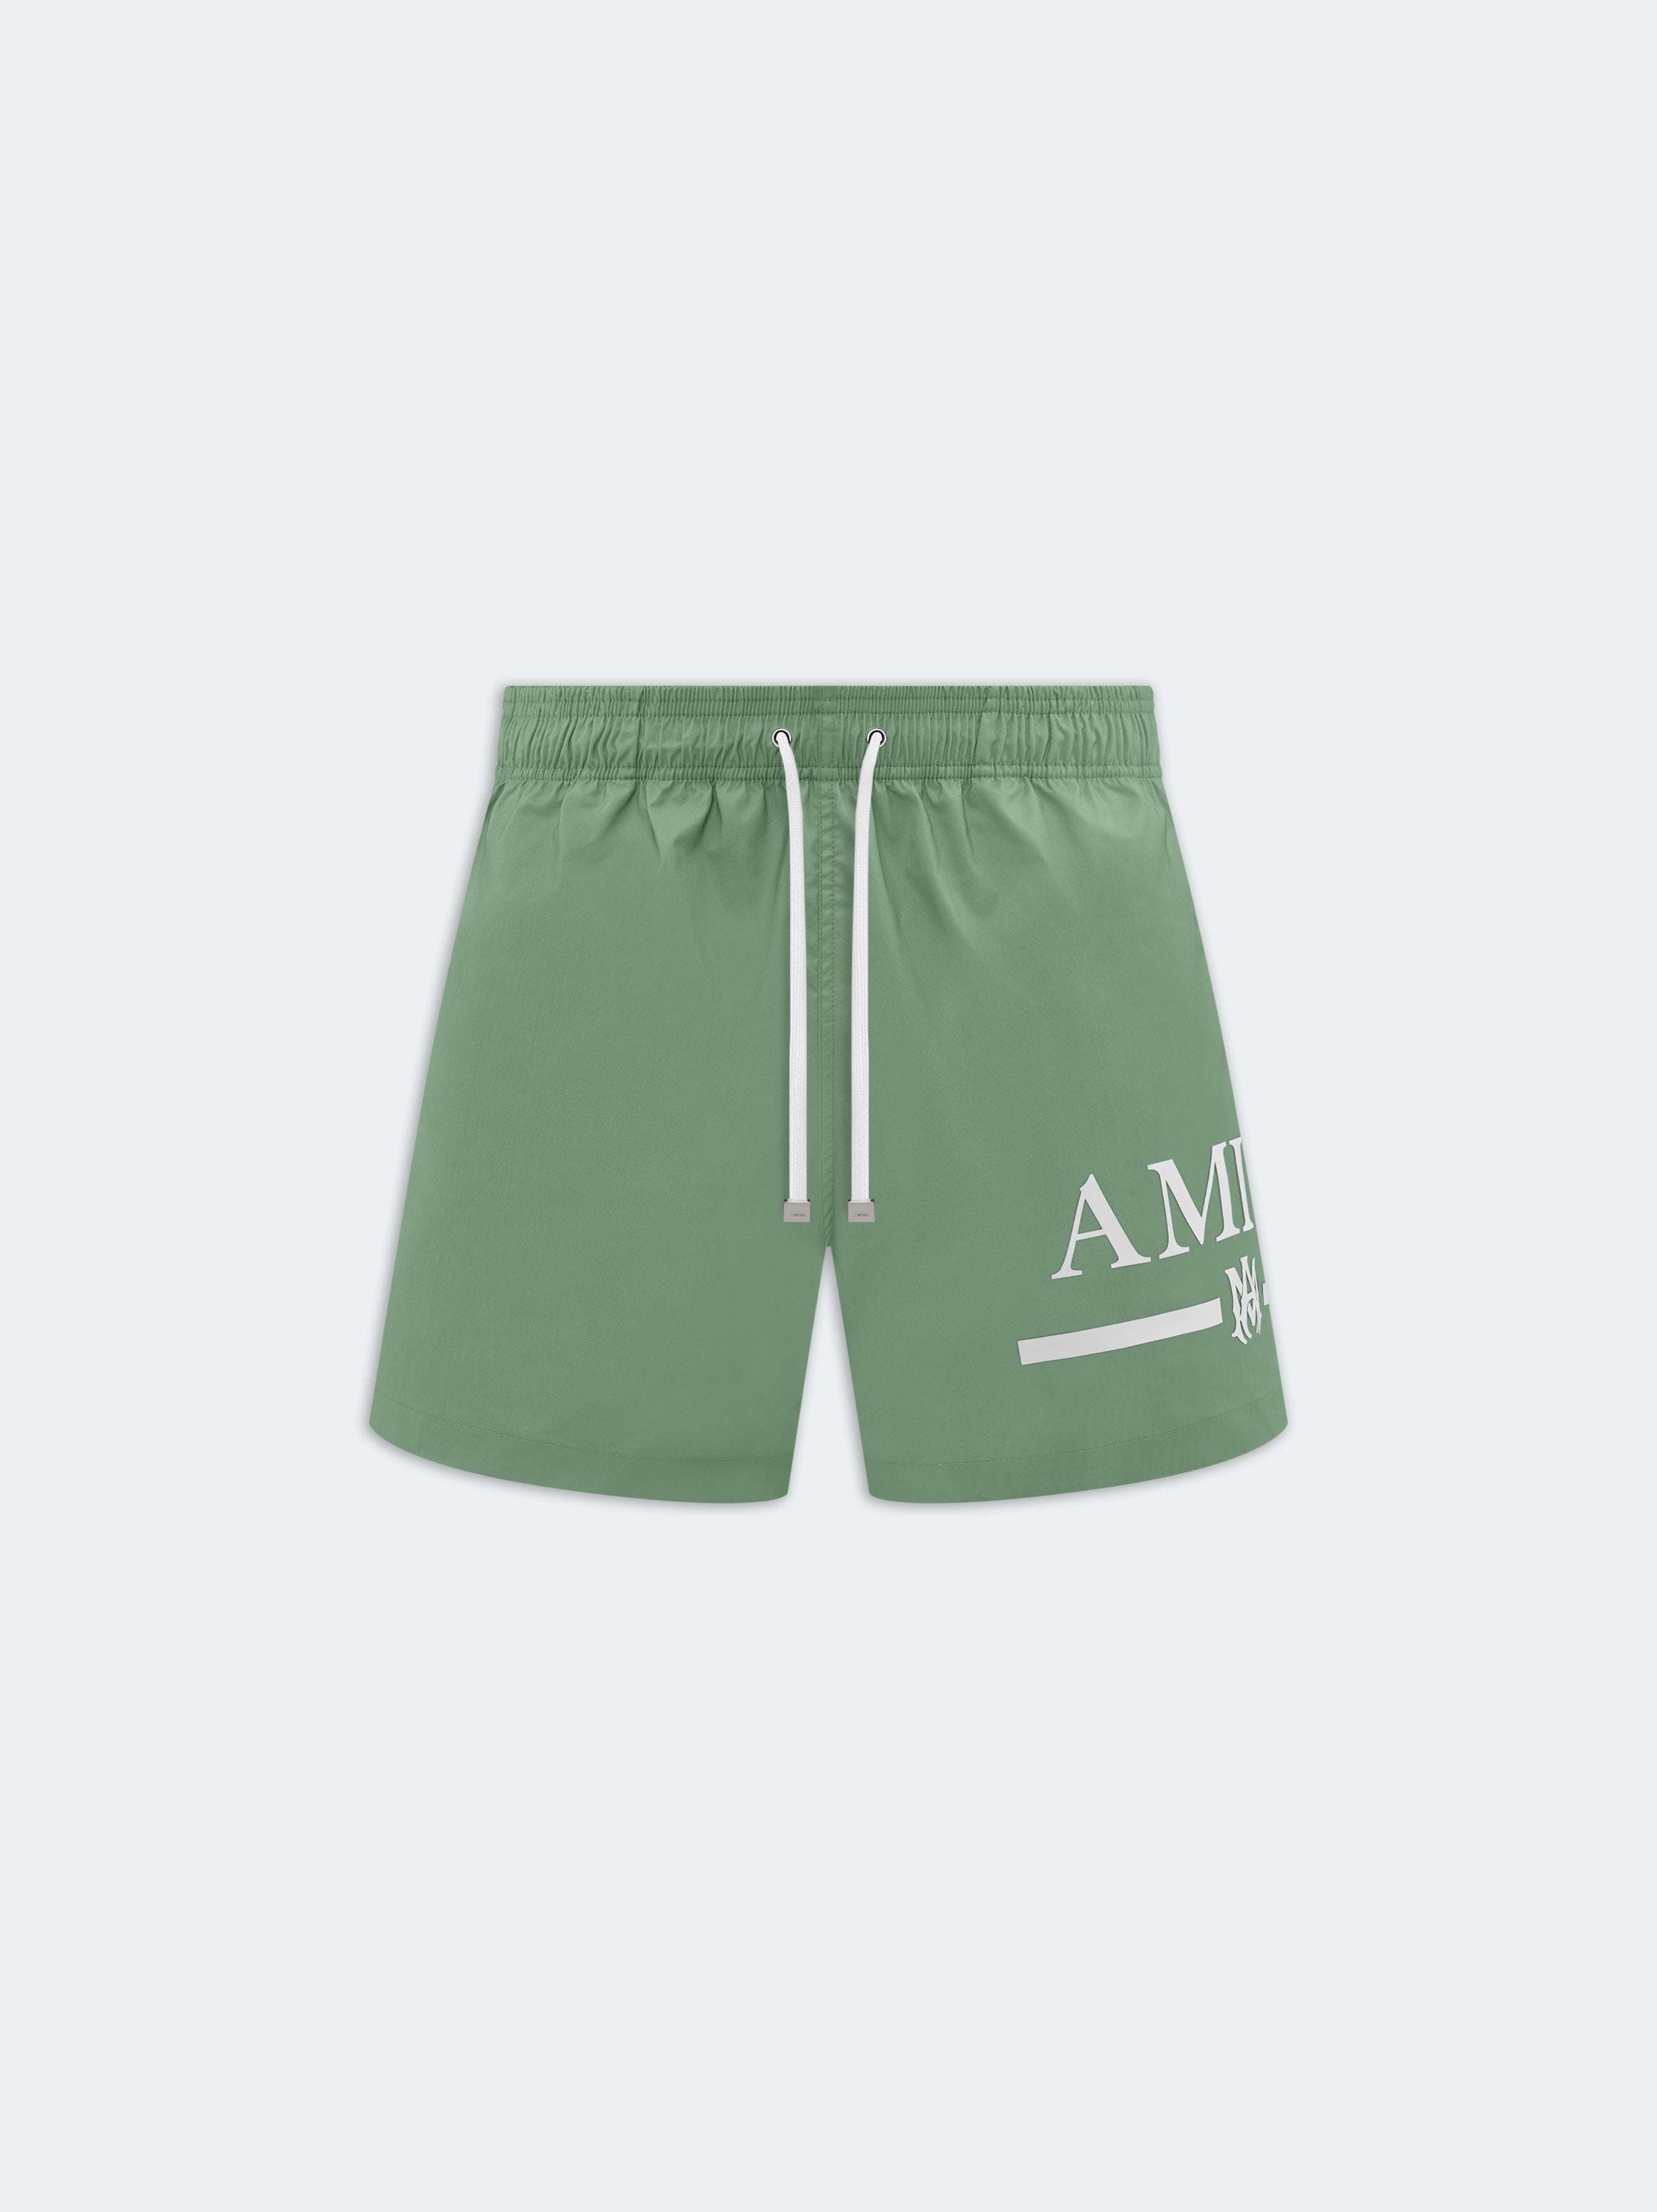 Product MA BAR LOGO SWIM TRUNK - Mineral Green featured image